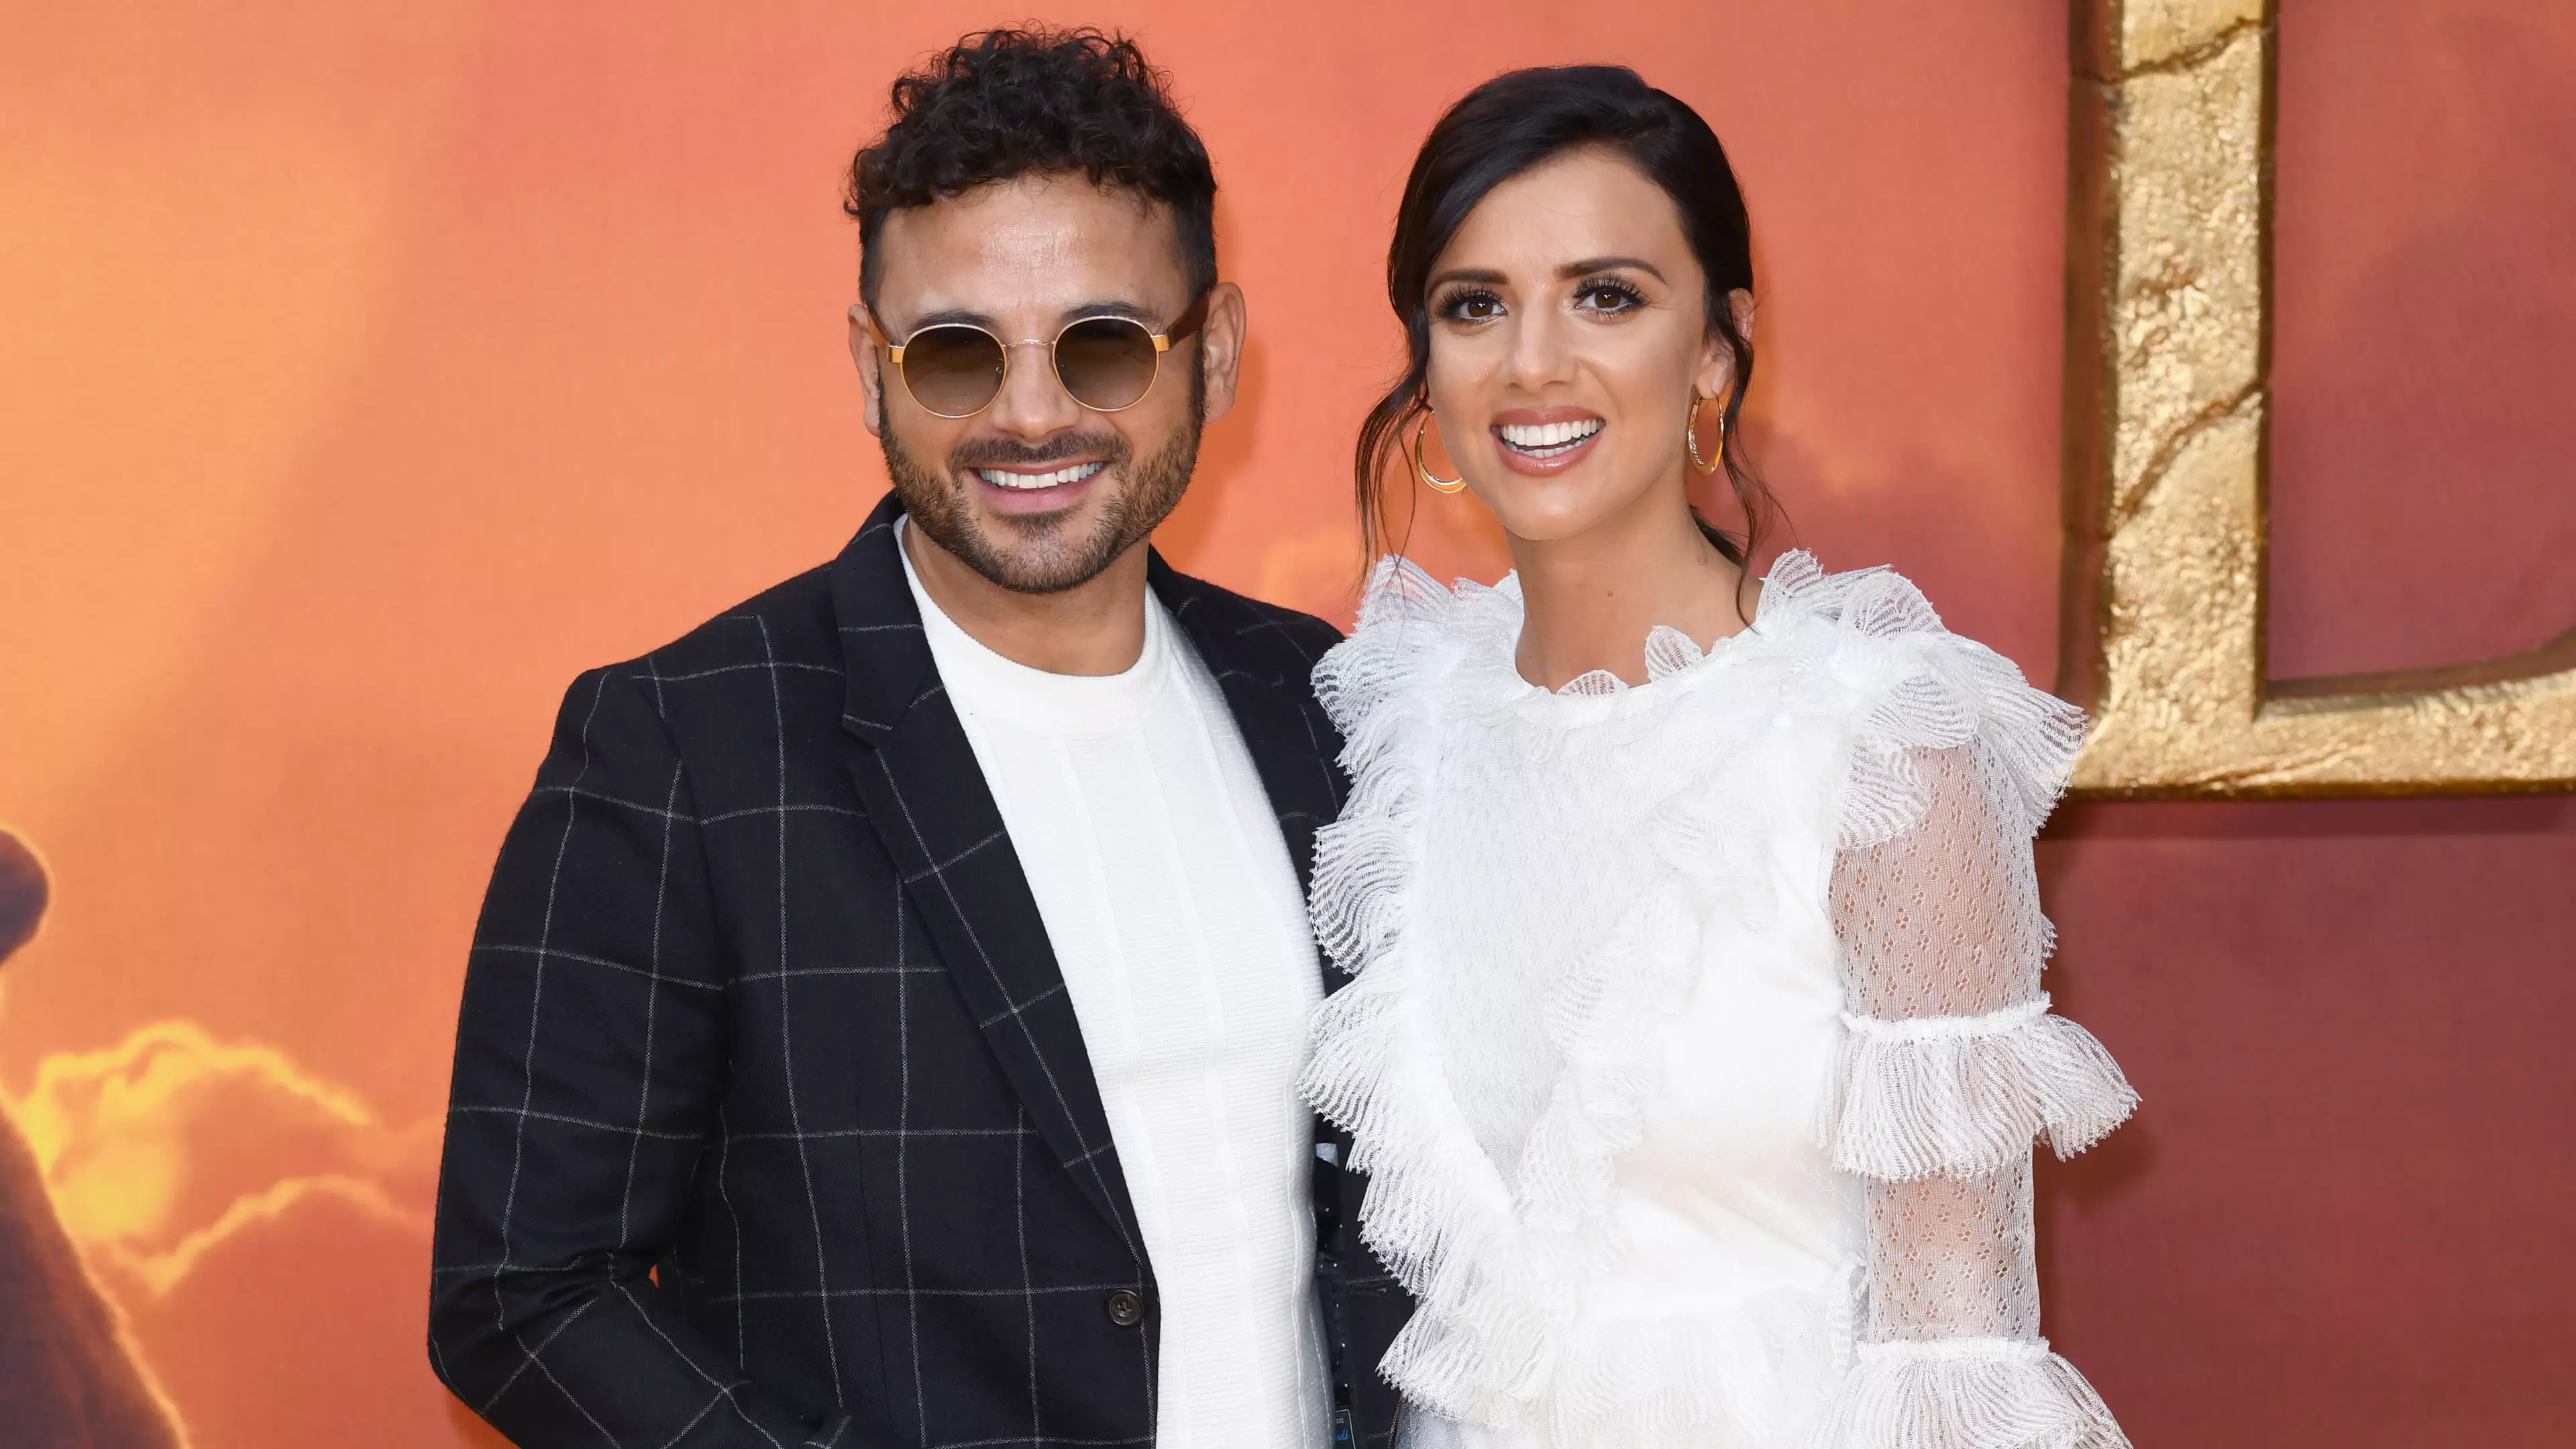 Lucy Mecklenburgh Shares Adorable Pic Of Baby Roman And He's The Spitting Image Of Ryan Thomas